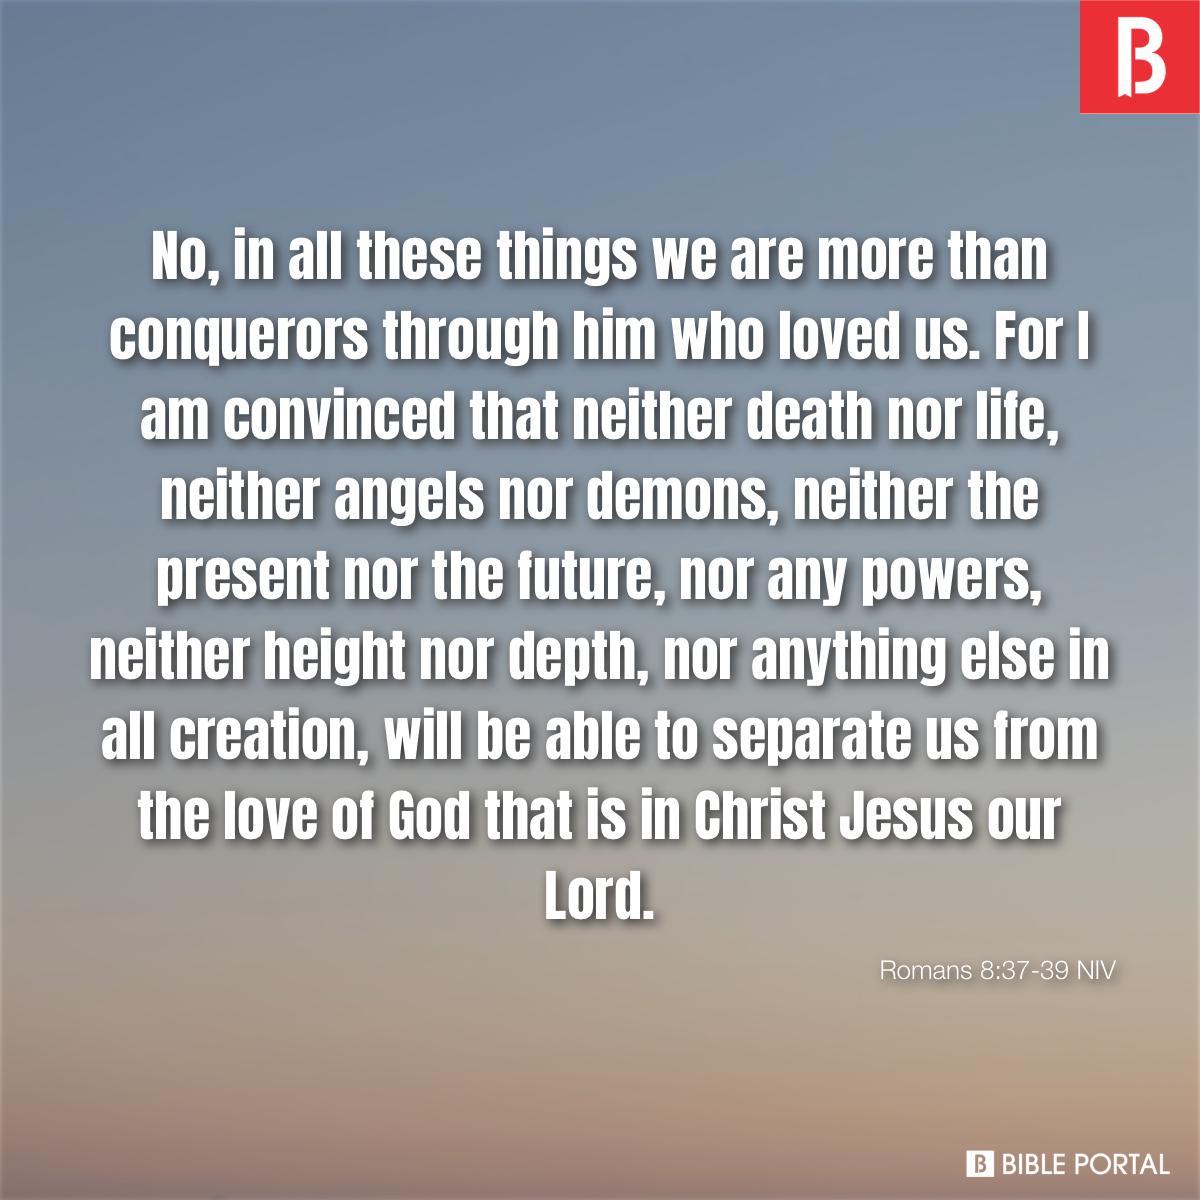 Bible verse of the day - August 11, 2022 - Romans 8:37-39